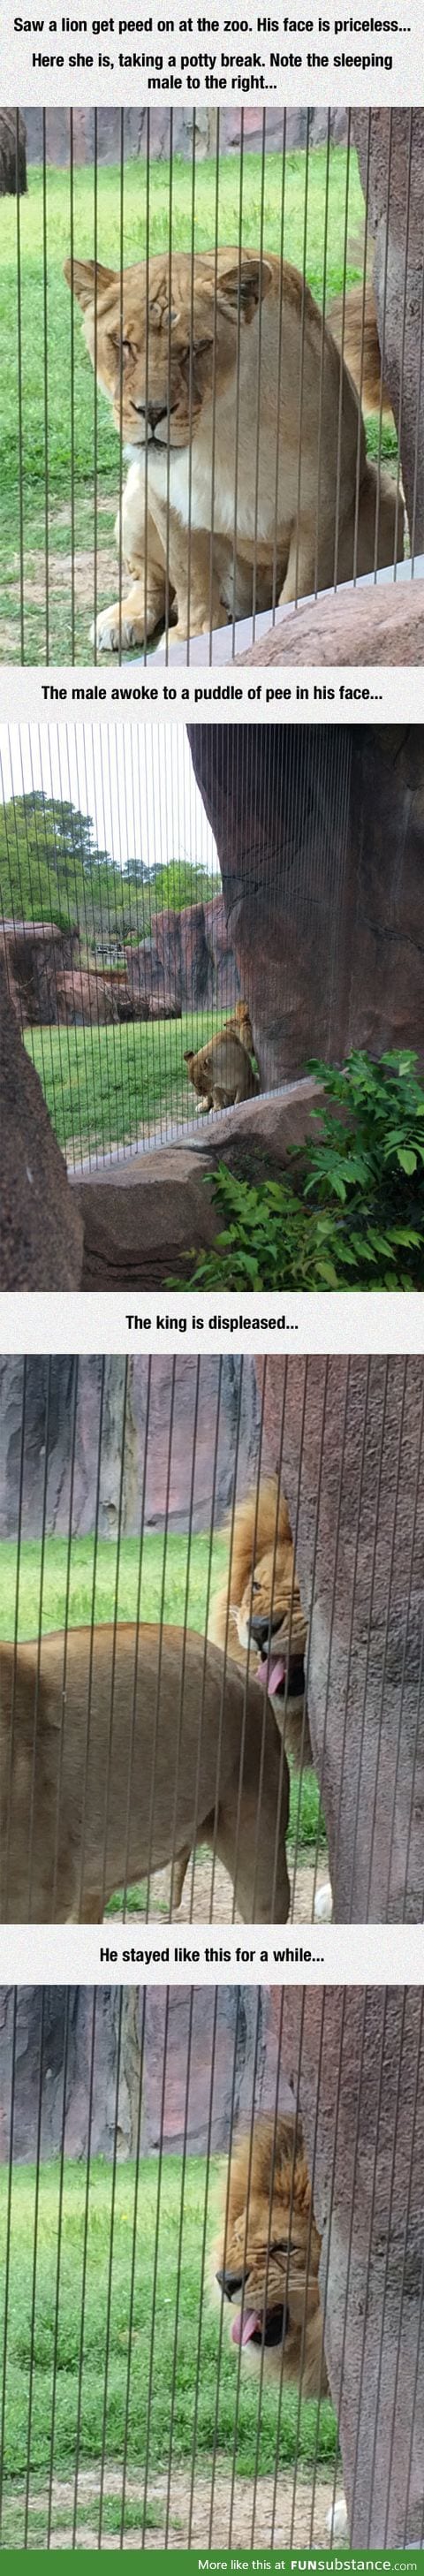 Disgust of the king